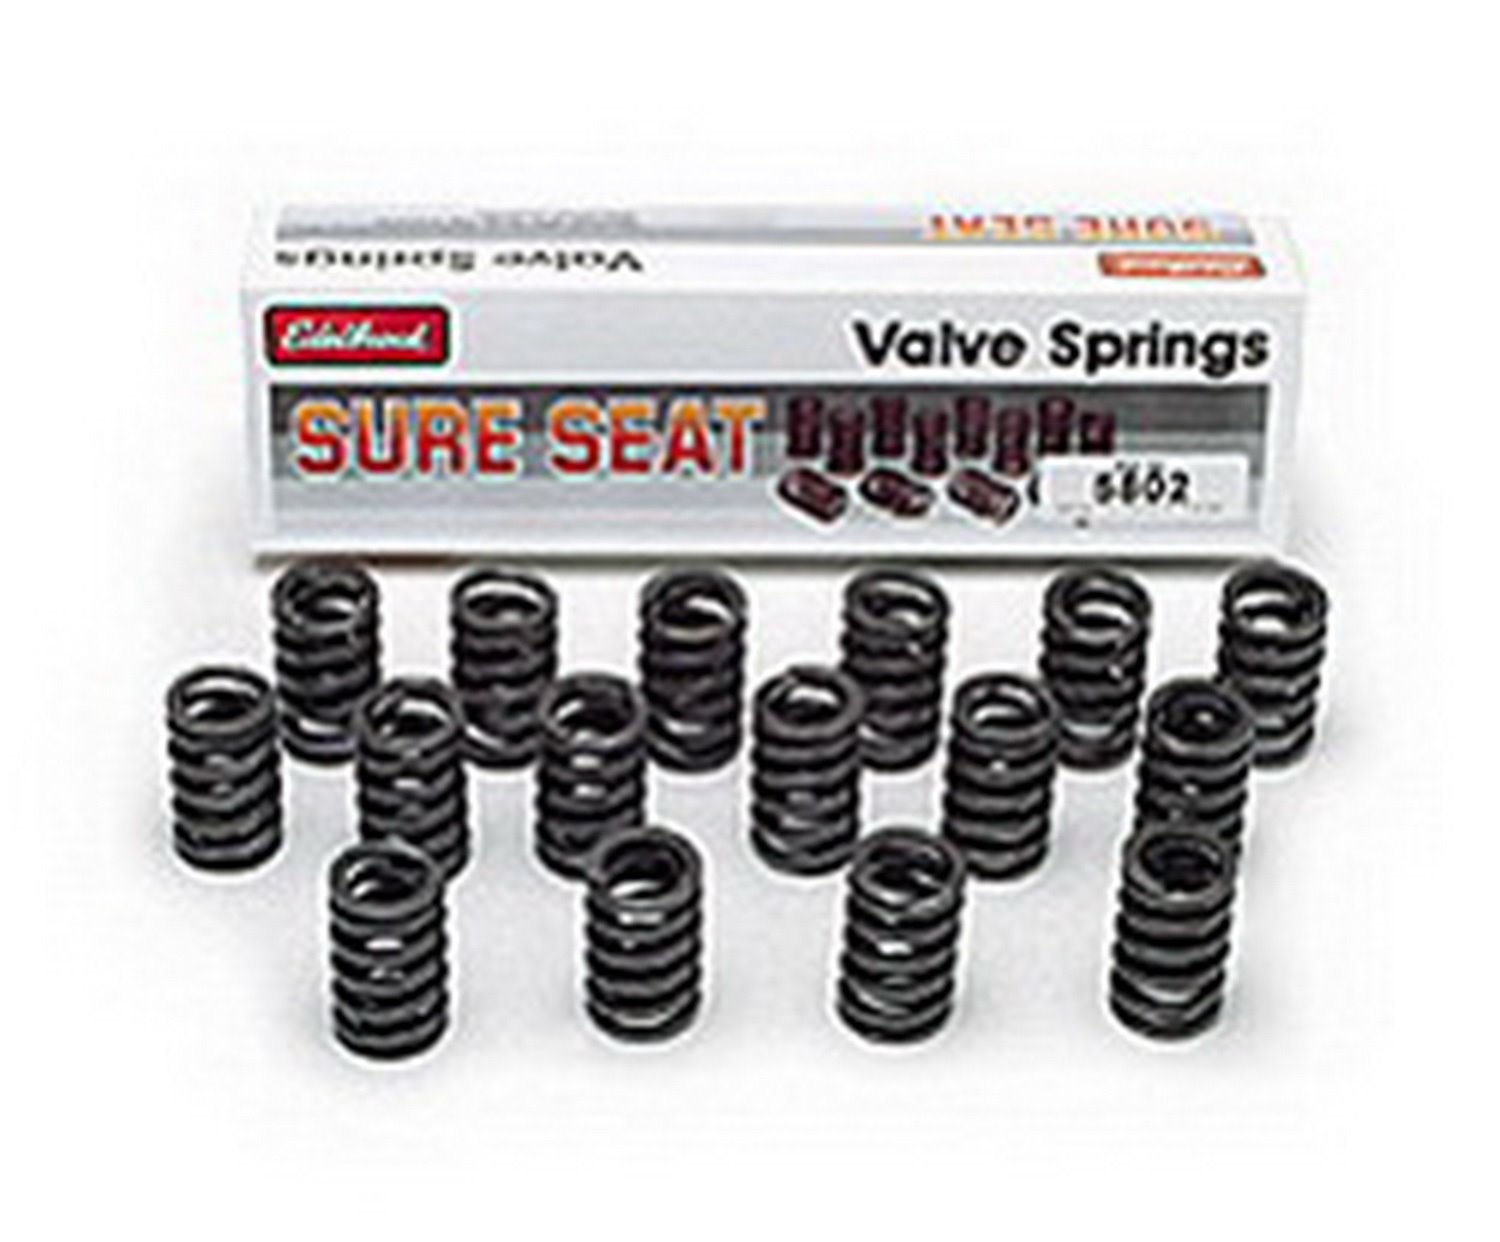 Sure Seat Valve Springs for 1961-1976 Ford FE 390-428 OE Cast Iron Head Rotator